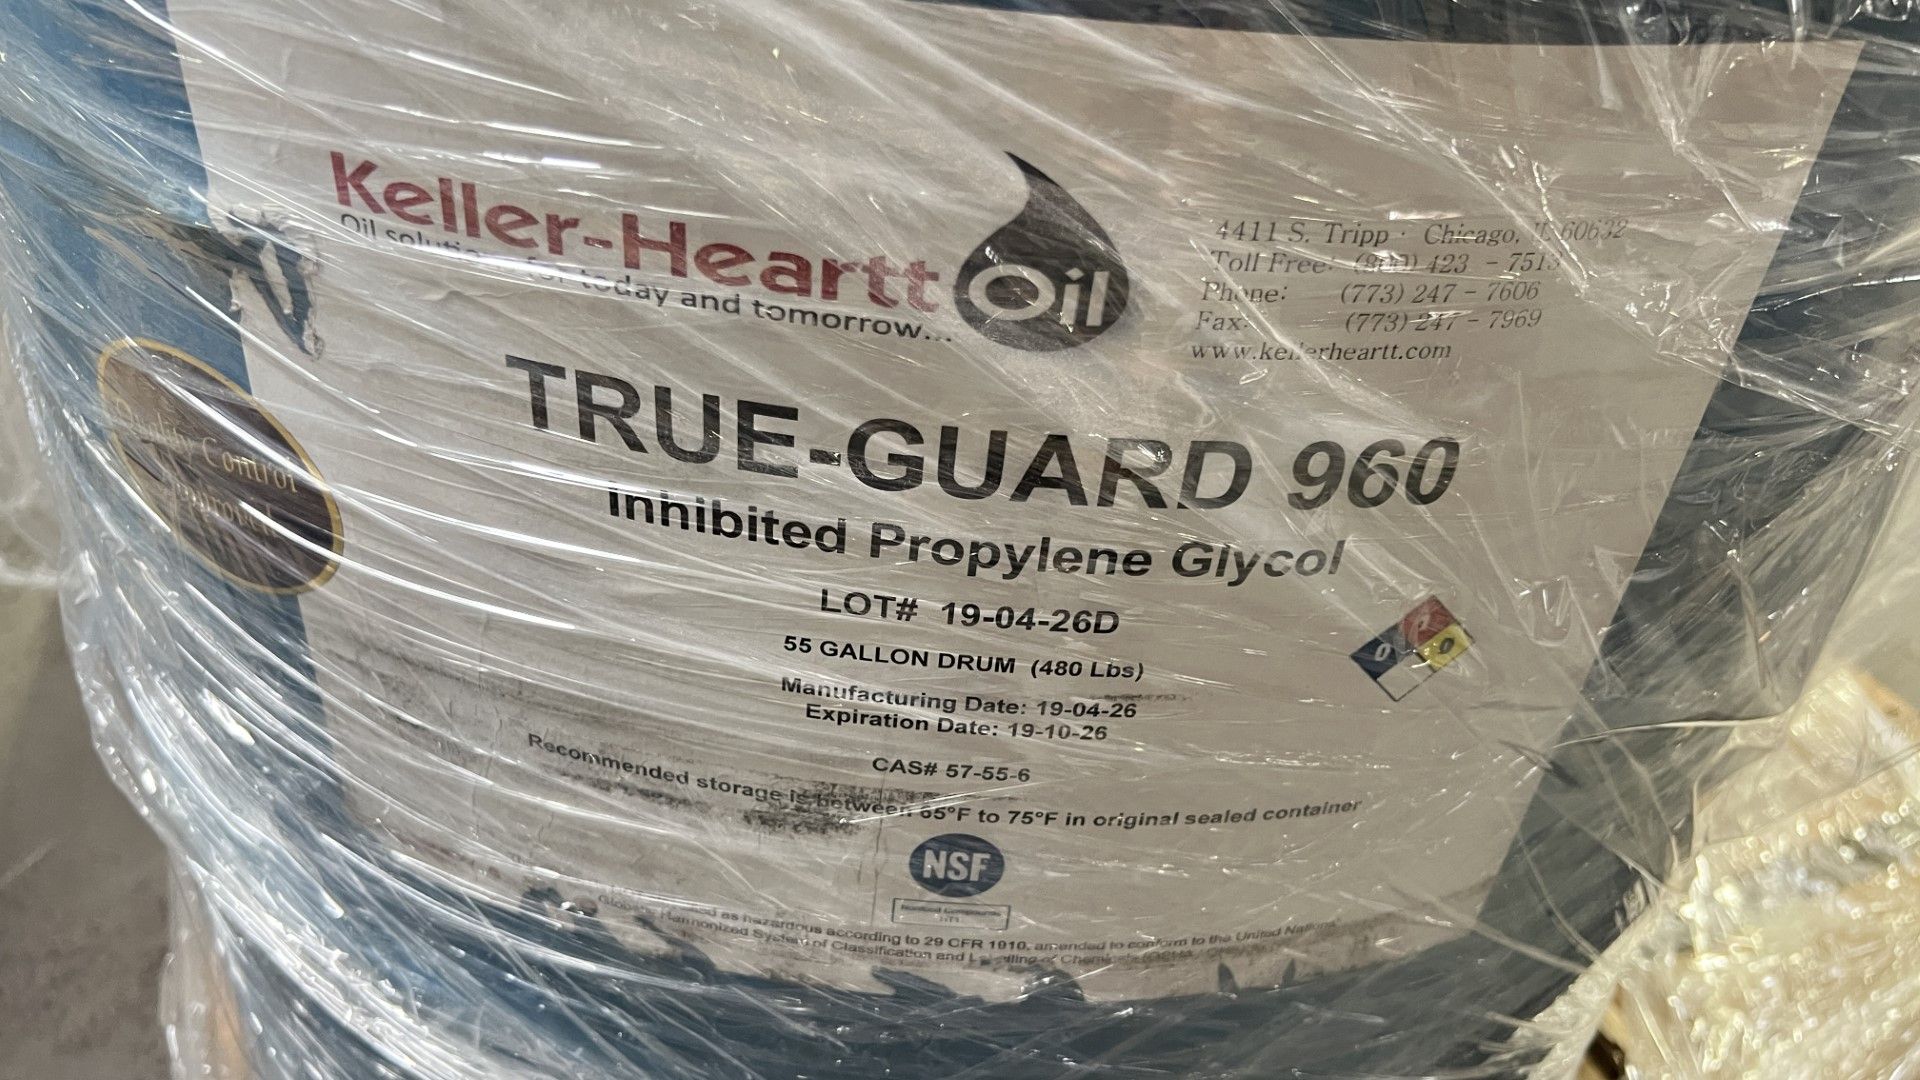 True-Guard Chemicals ( Inhibited Glycol) - Image 2 of 6